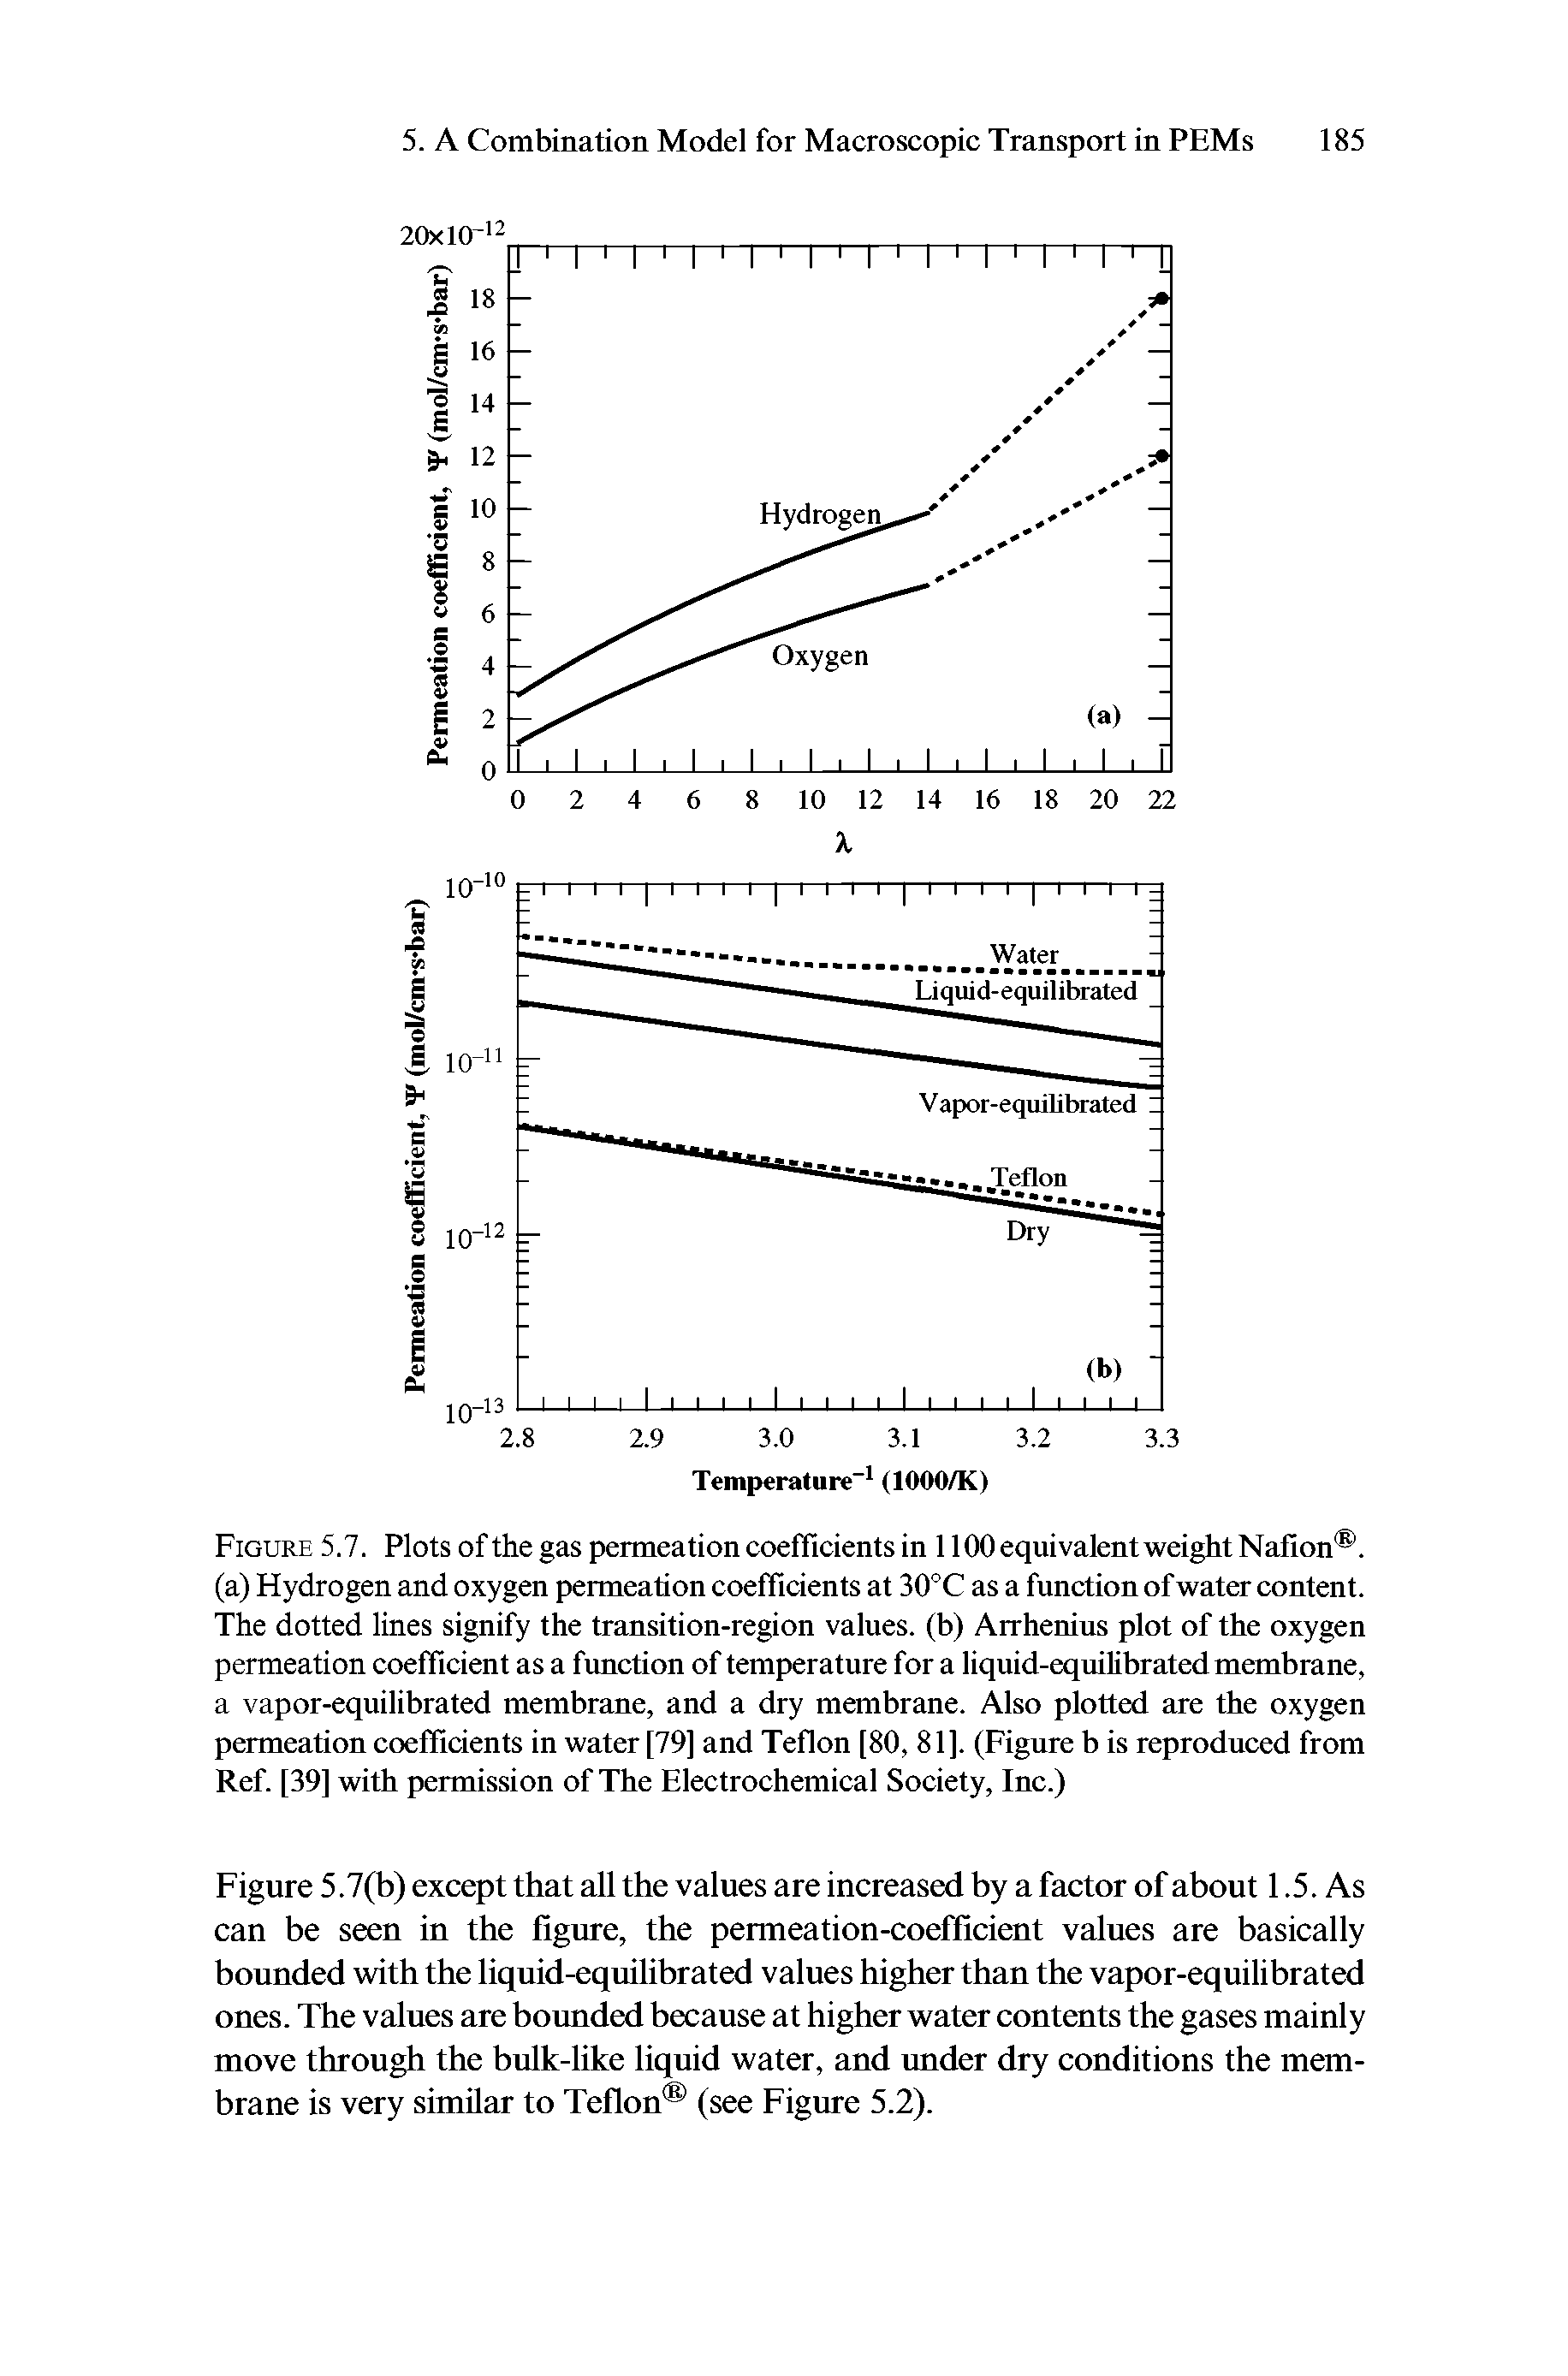 Figure 5.7. Plots of the gas permeation coefficients in 1100 equivalent weight Nafion . (a) Hydrogen and oxygen permeation coefficients at 30°C as a function of water content. The dotted lines signify the transition-region values, (b) Arrhenius plot of the oxygen permeation coefficient as a function of temperature for a liquid-equilibrated membrane, a vapor-equilibrated membrane, and a dry membrane. Also plotted are the oxygen permeation coefficients in water [79] and Teflon [80, 81]. (Figure b is reproduced from Ref. [39] with permission of The Electrochemical Society, Inc.)...